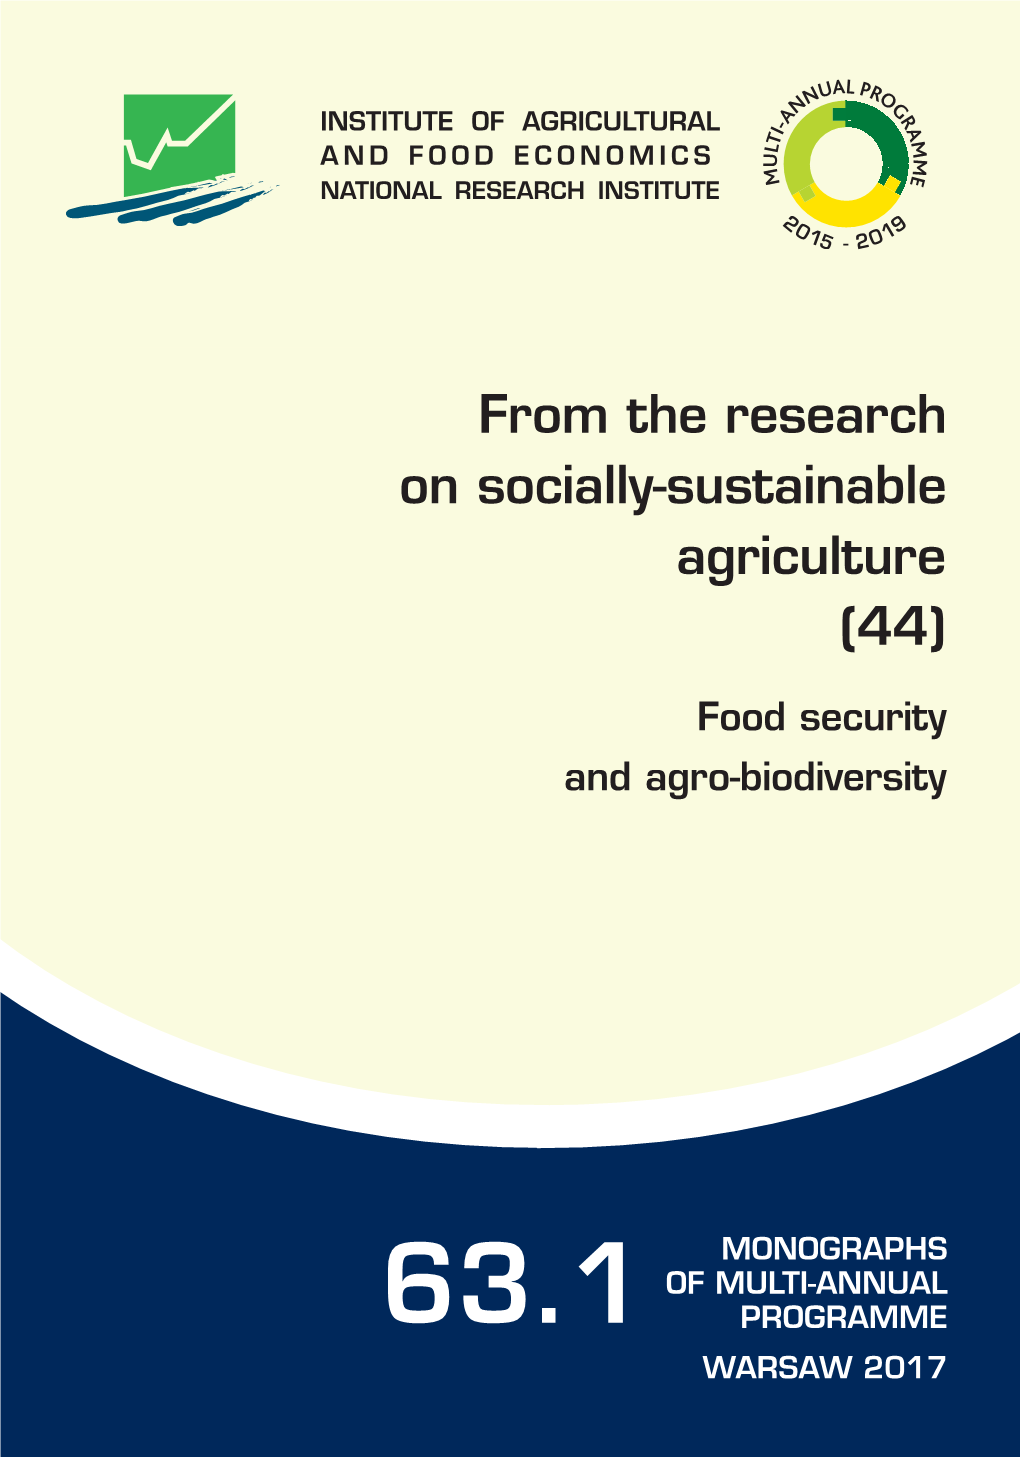 From the Research on Socially-Sustainable Agriculture (44)